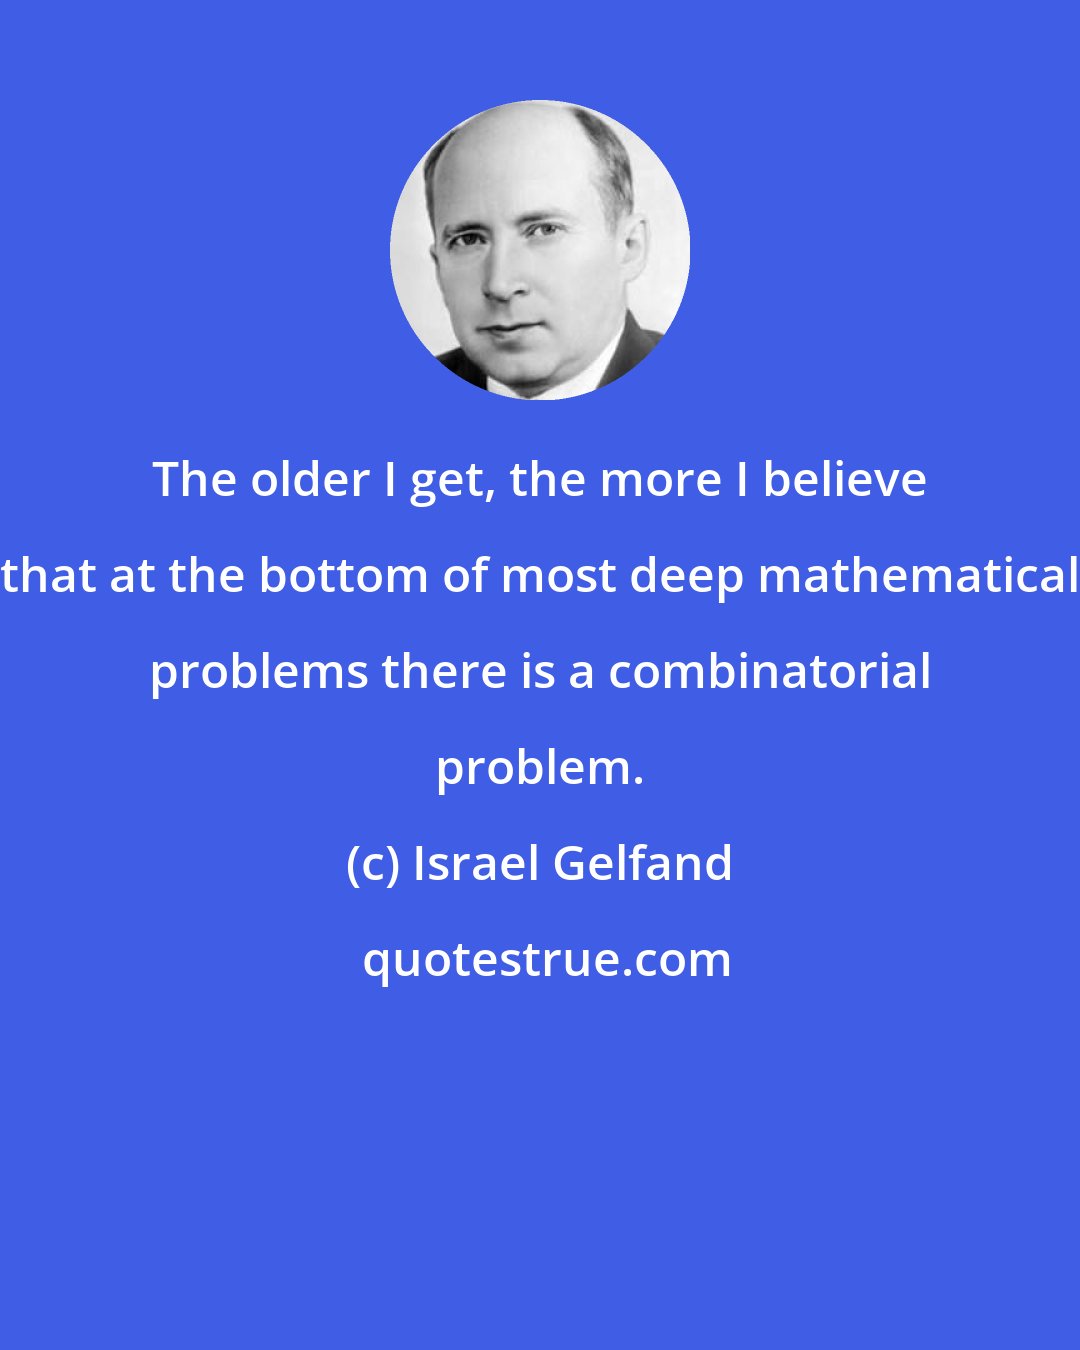 Israel Gelfand: The older I get, the more I believe that at the bottom of most deep mathematical problems there is a combinatorial problem.